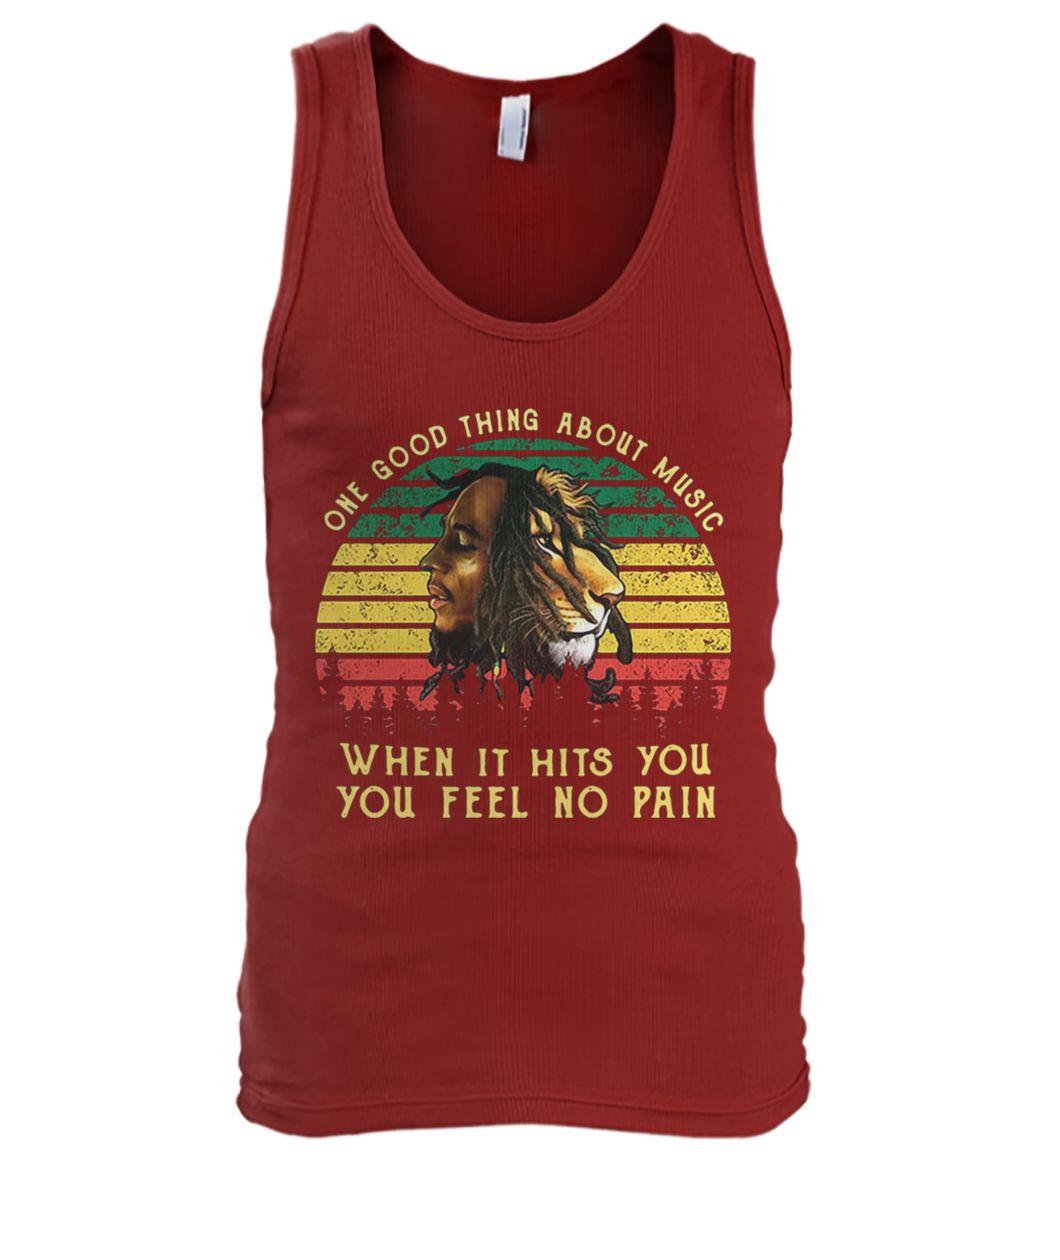 Vintage bob marley iron lion zion one good thing about music when it hits you you feel no pain men's tank top